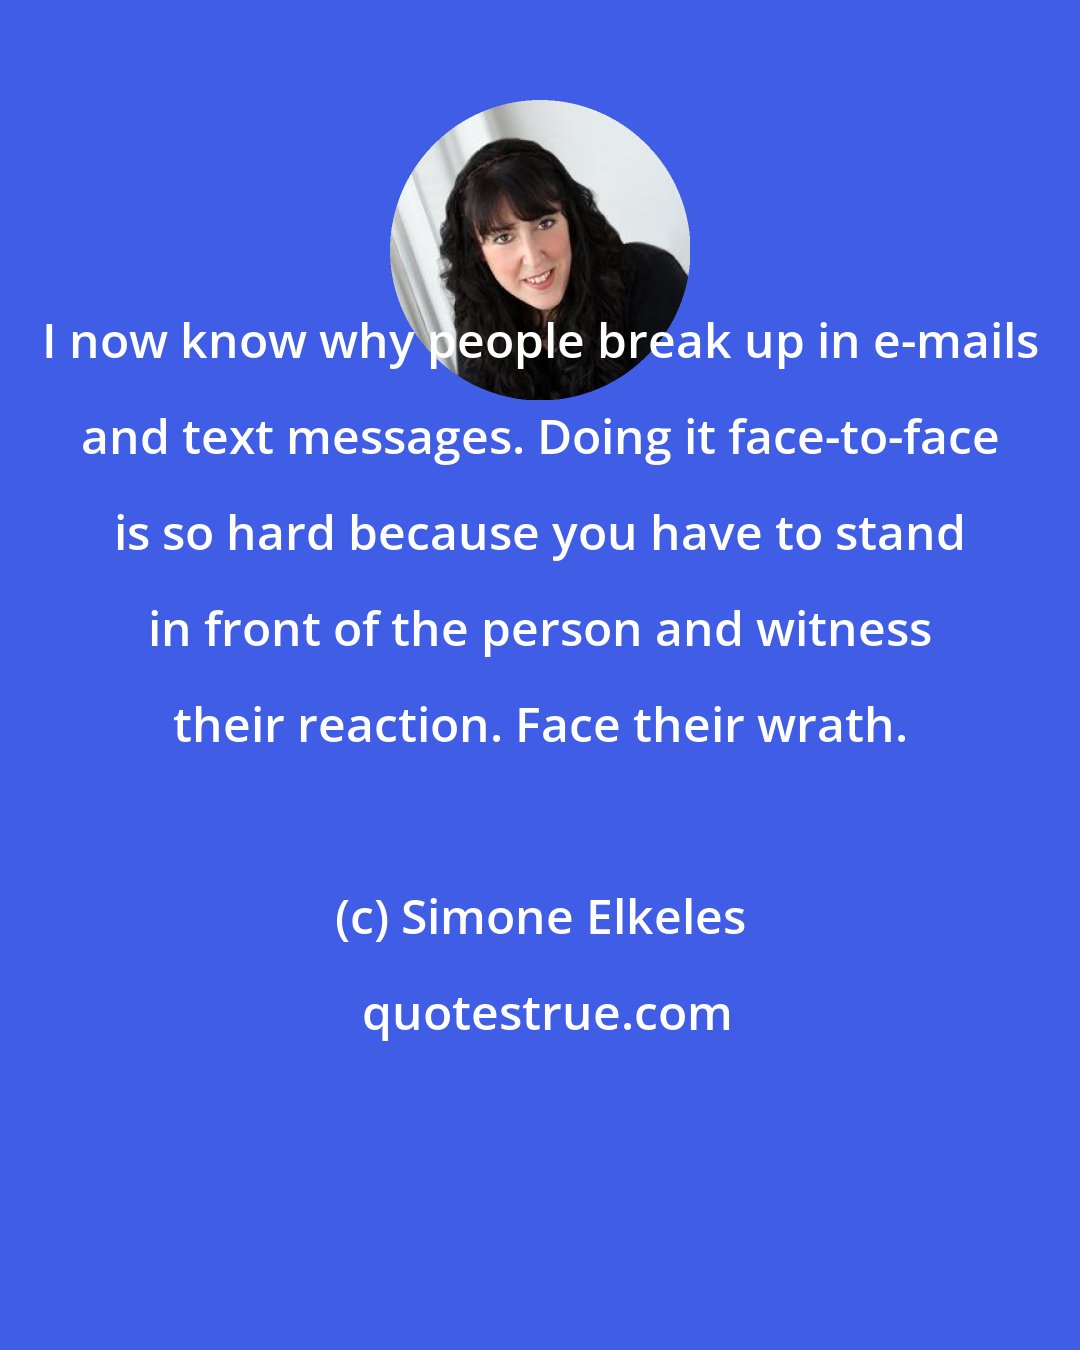 Simone Elkeles: I now know why people break up in e-mails and text messages. Doing it face-to-face is so hard because you have to stand in front of the person and witness their reaction. Face their wrath.